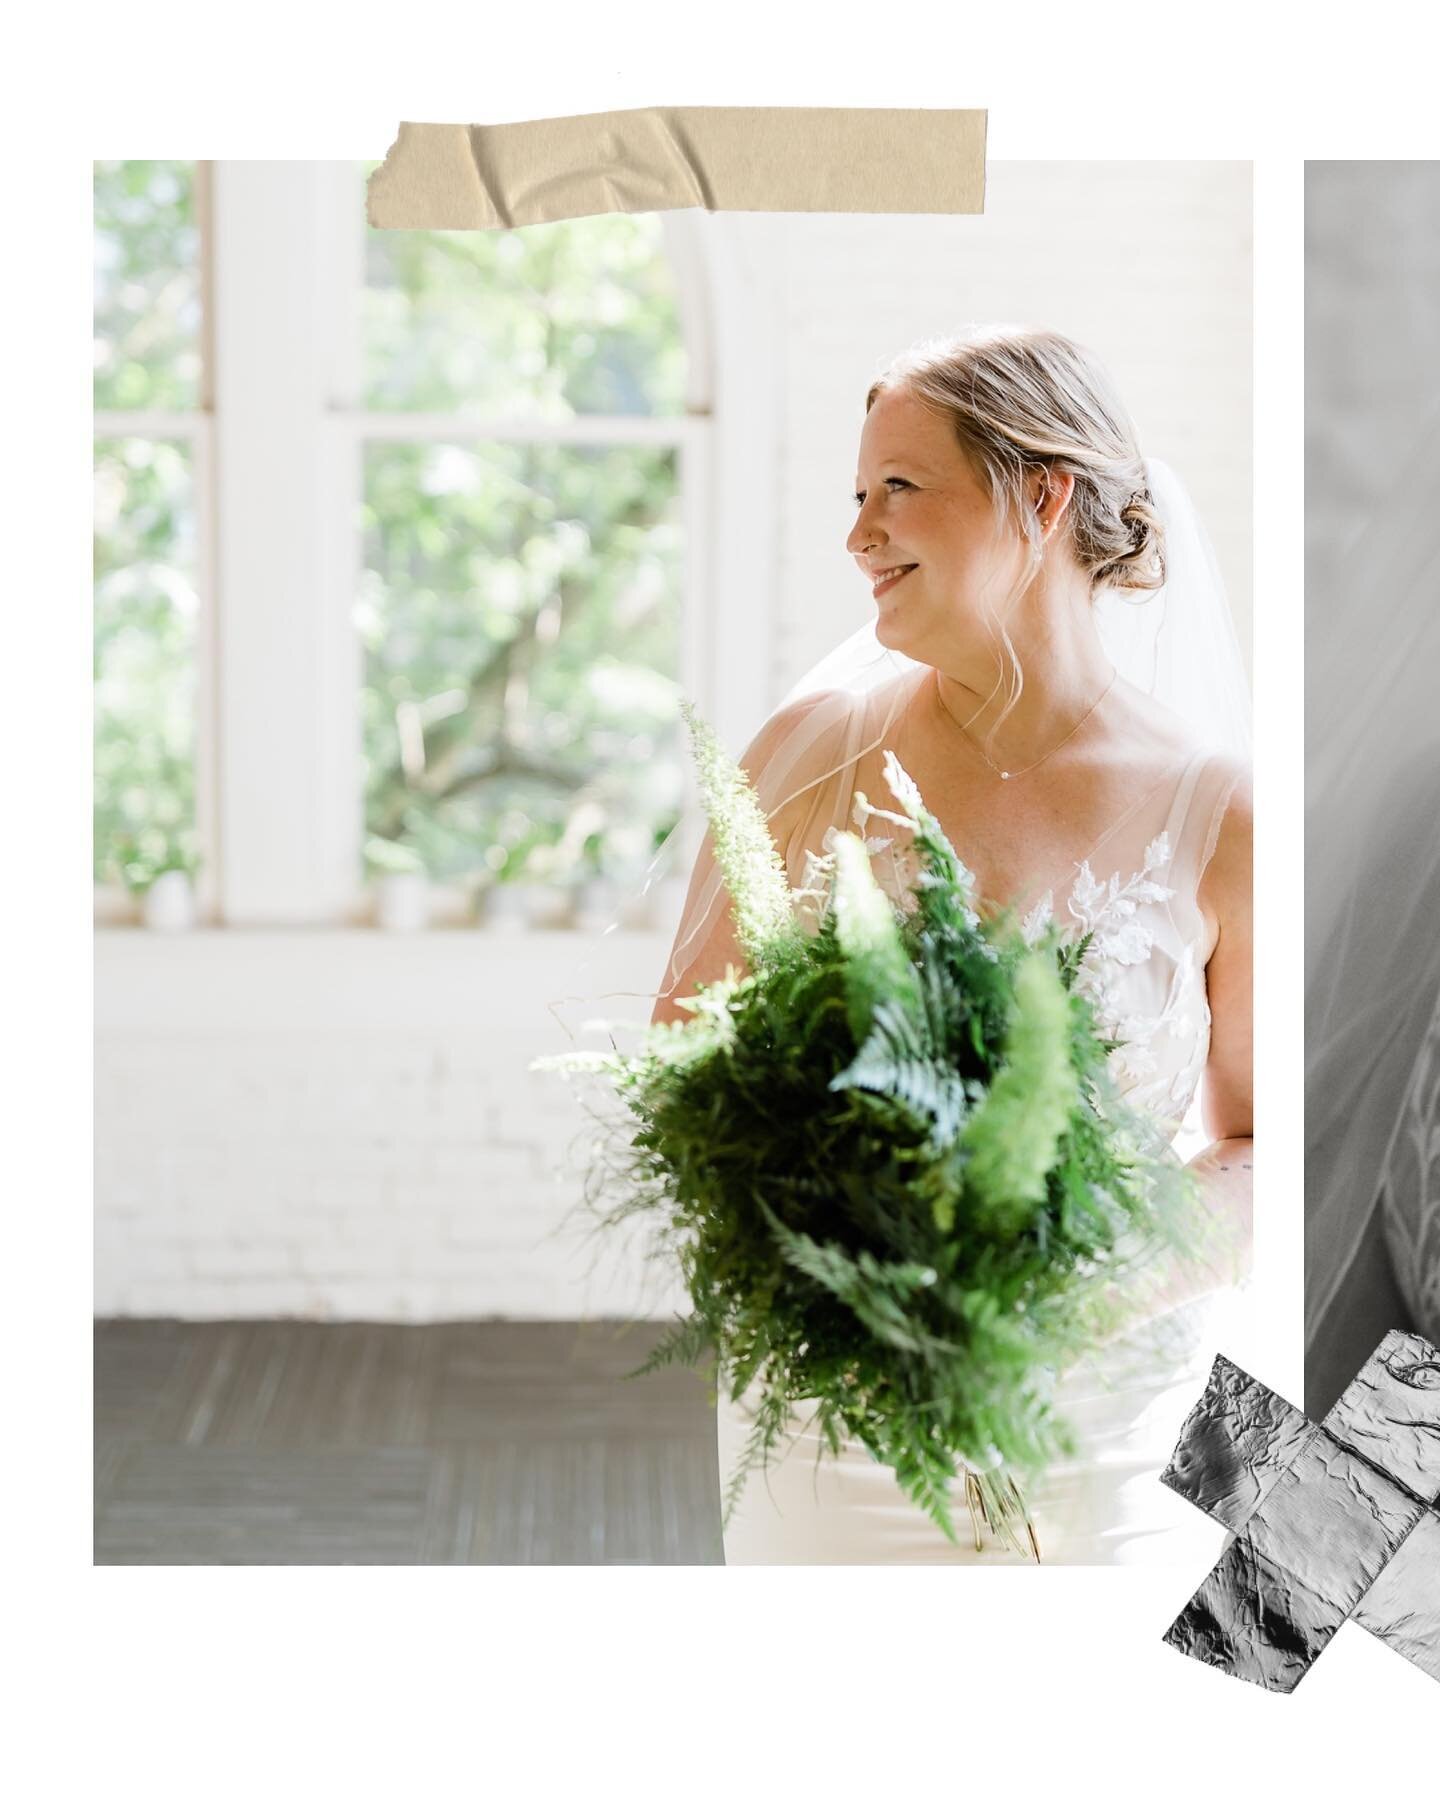 Last Saturday I shot a beautiful, laid back wedding for the sweetest couple at @ecotrustevents 😍 Also, fun story&hellip;when I went for a venue walk-thru the bride, caterer, and me all had the same @portlandleather round bag in different colors 😆 I